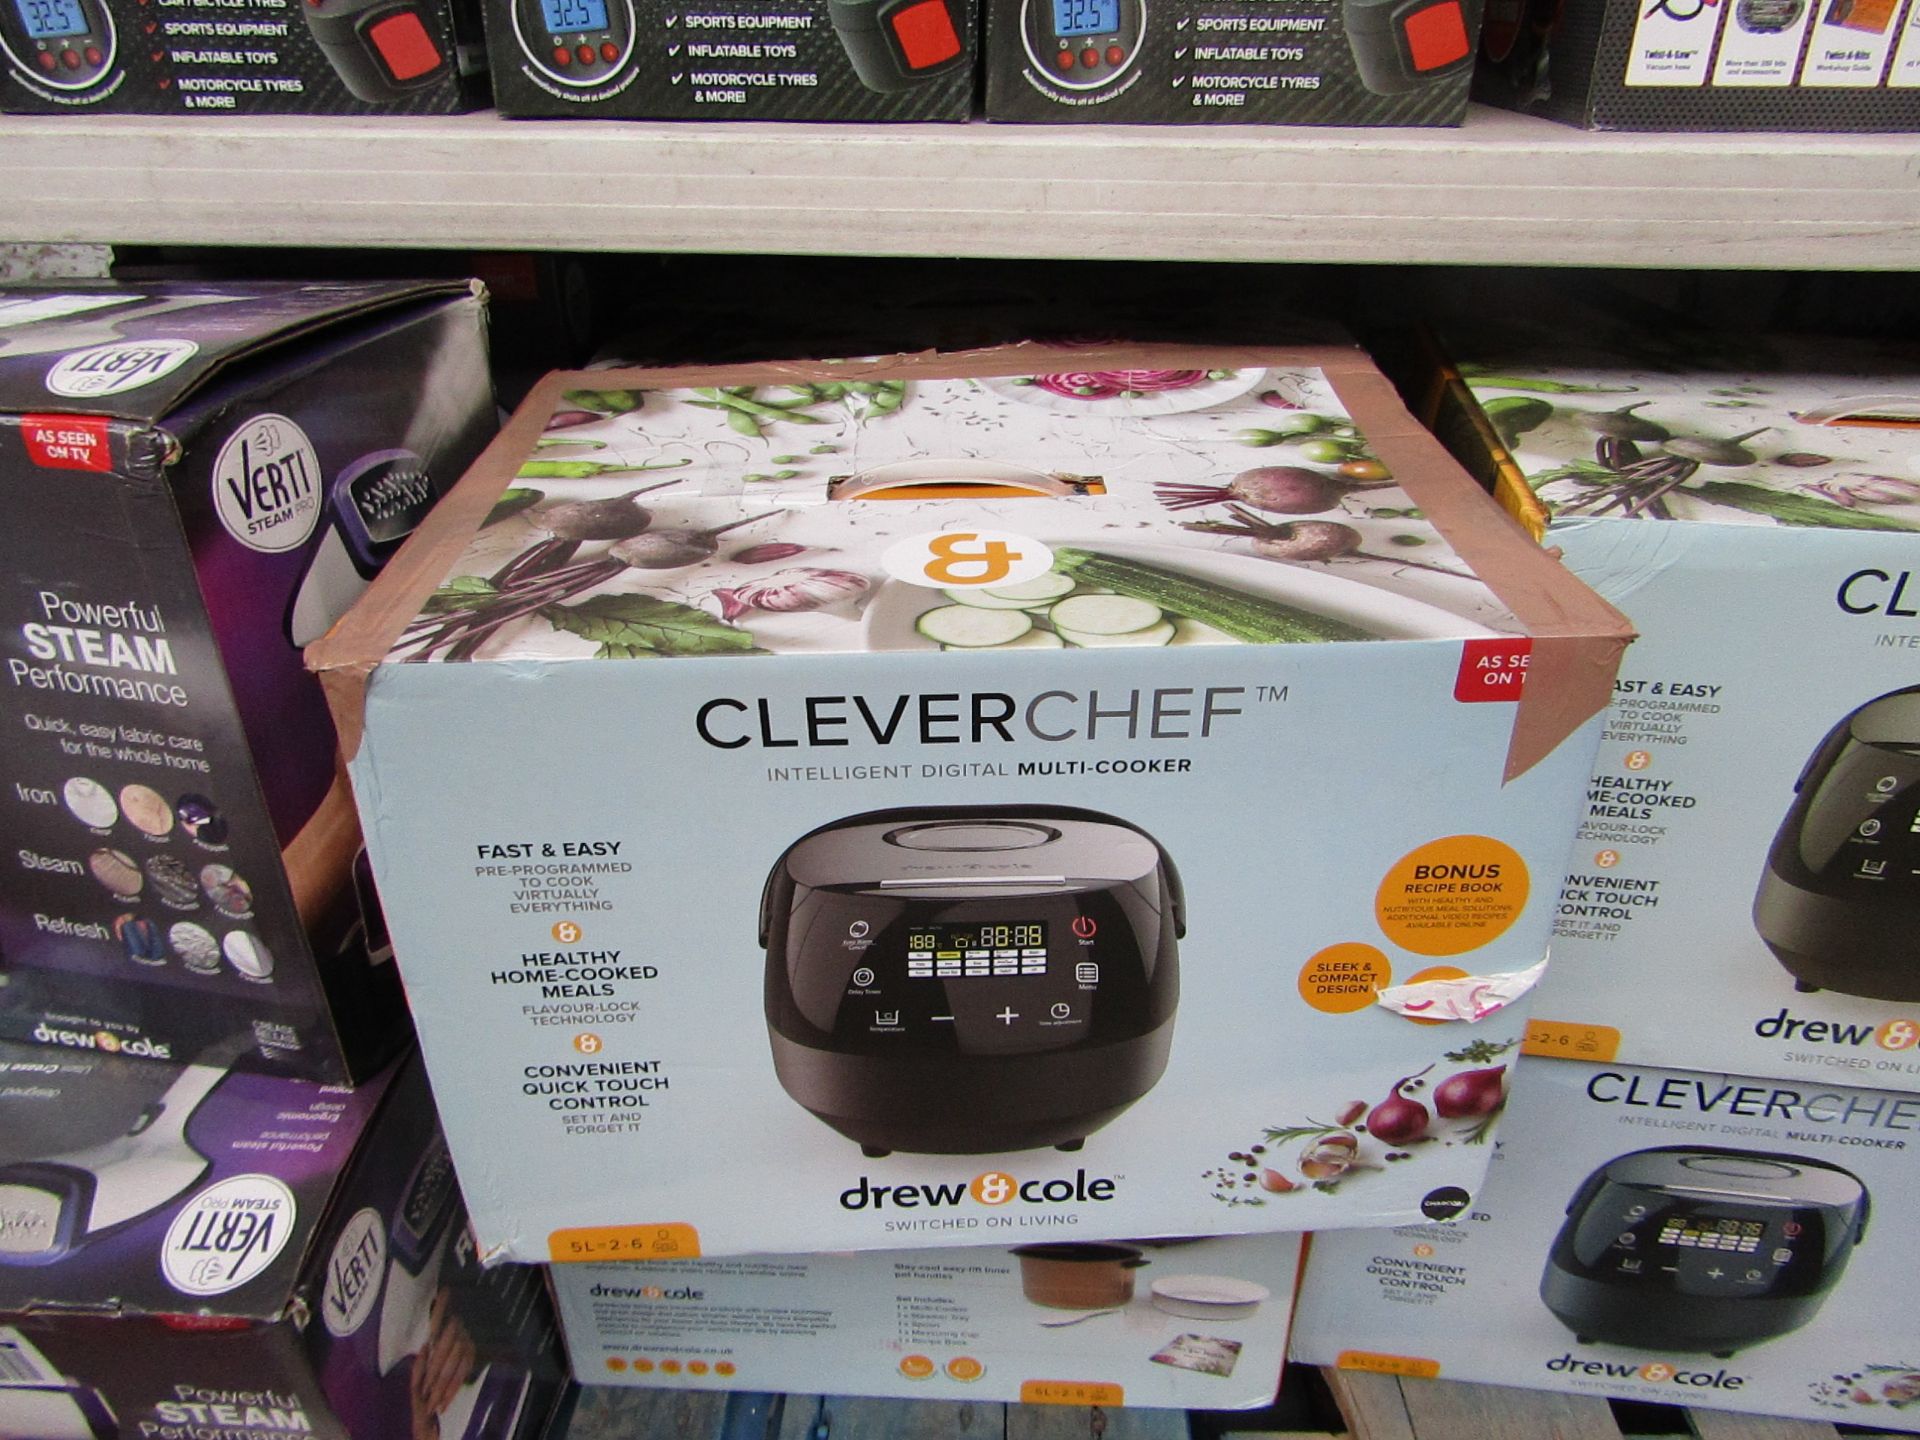 | 1X | DREW & COLE CLEVERCHEF | UNCHECKED AND BOXED | NO ONLINE RE-SALE | SKU 5060541511682 |